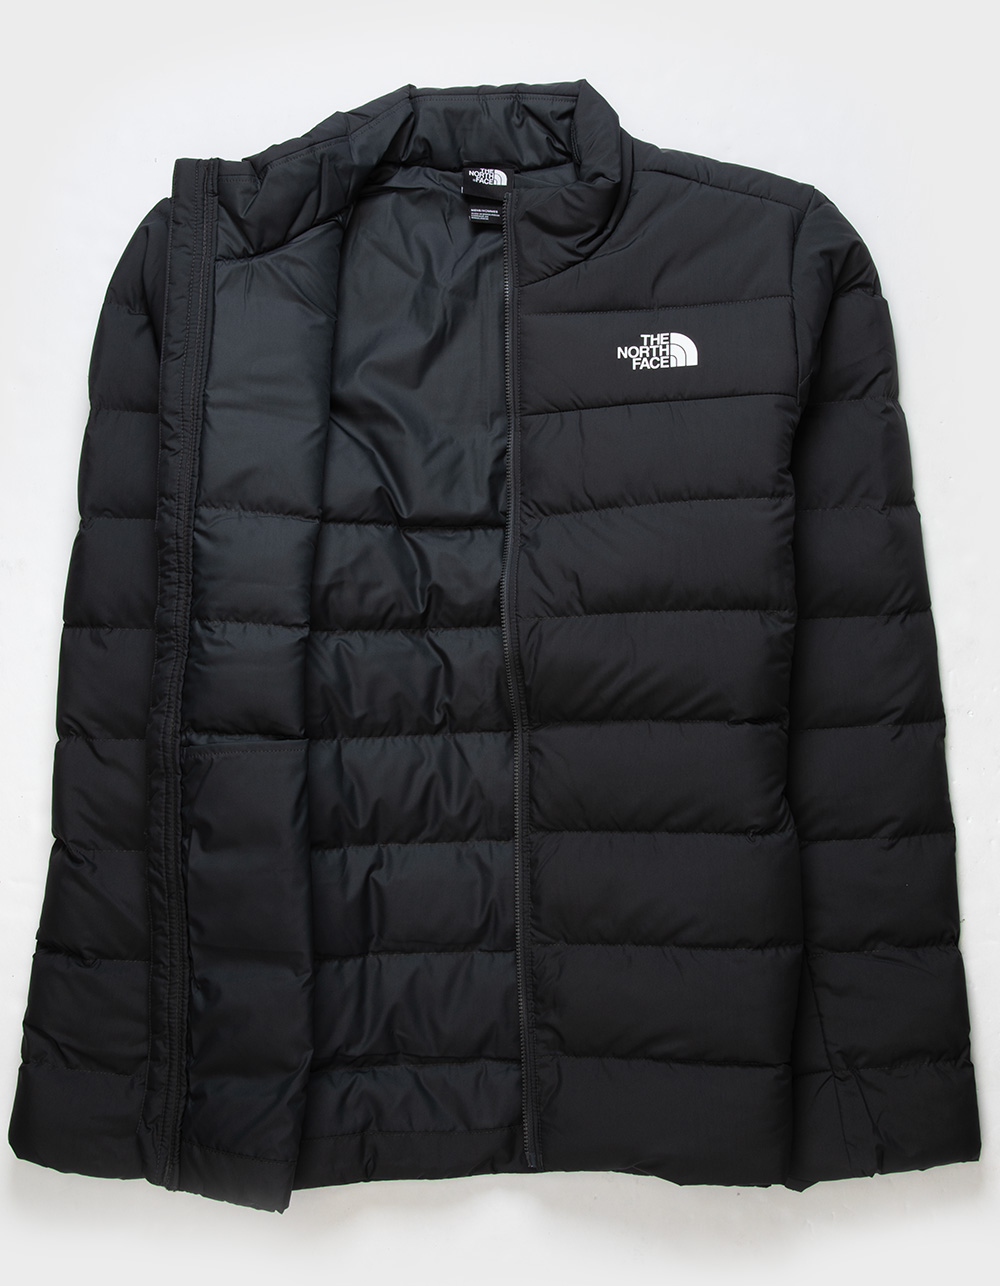 THE NORTH FACE Aconcagua 3 Mens Puffer Jacket - GRAY | Tillys